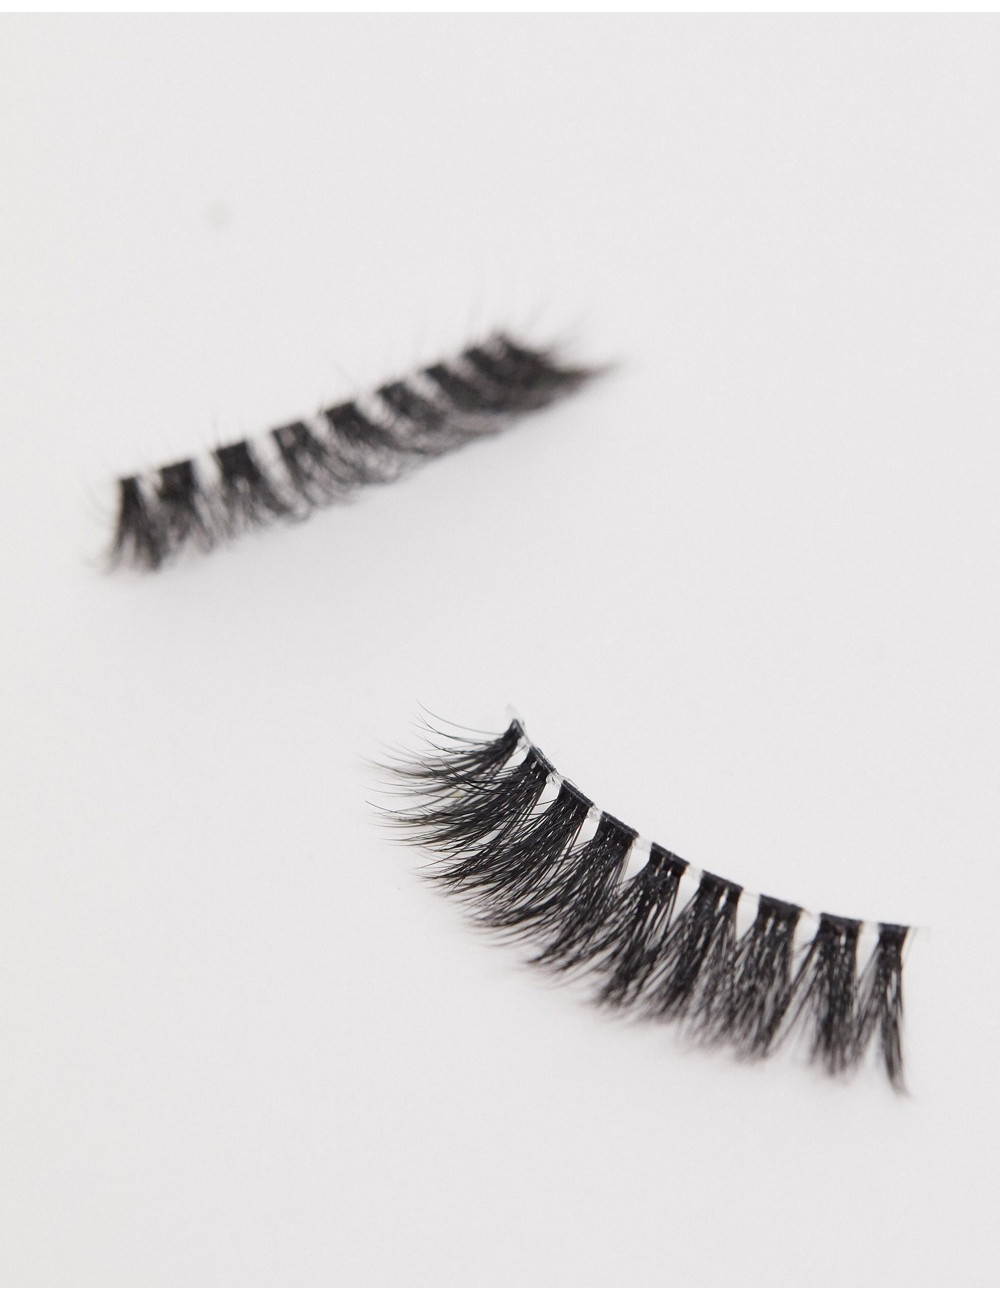 Eylure Luxe 3D Lashes -...